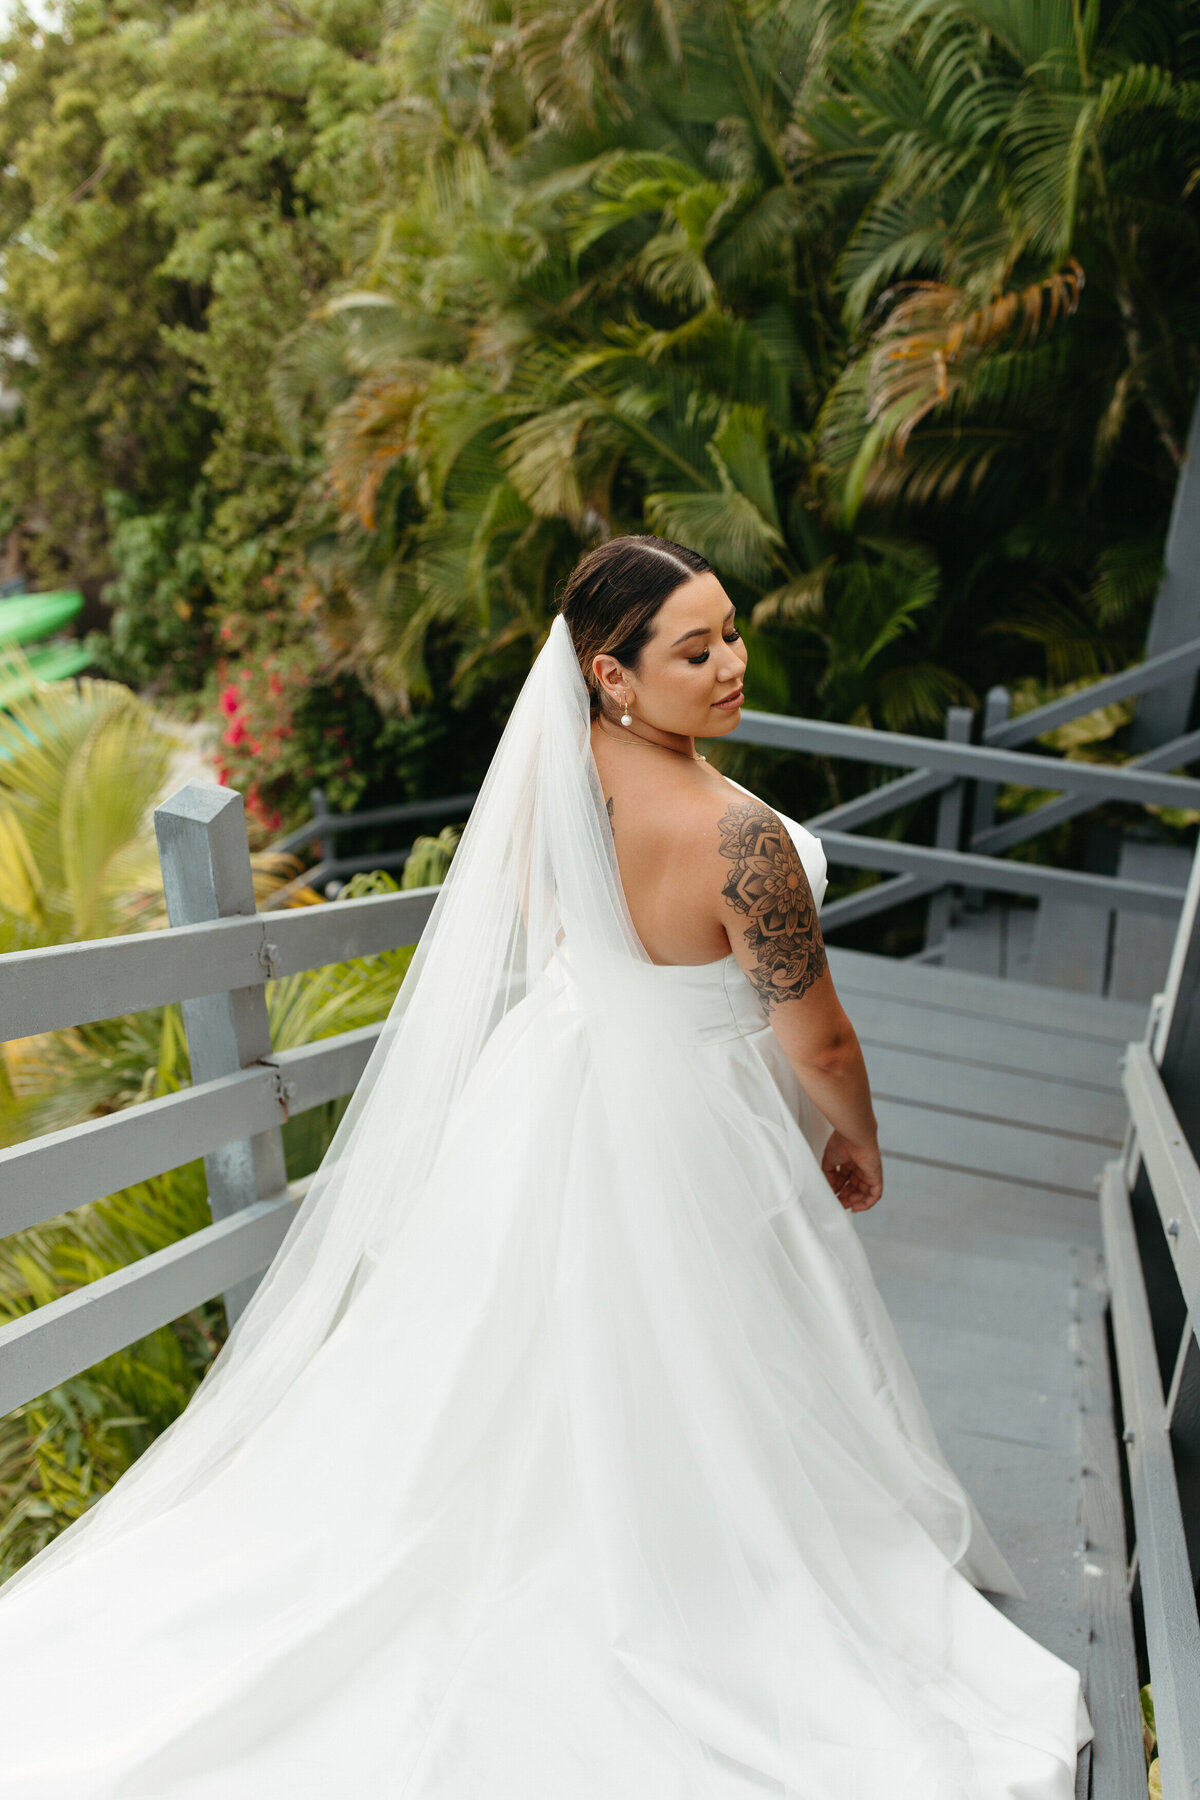 Bride in a flowing white dress gazing back on a wooden walkway, surrounded by rich foliage